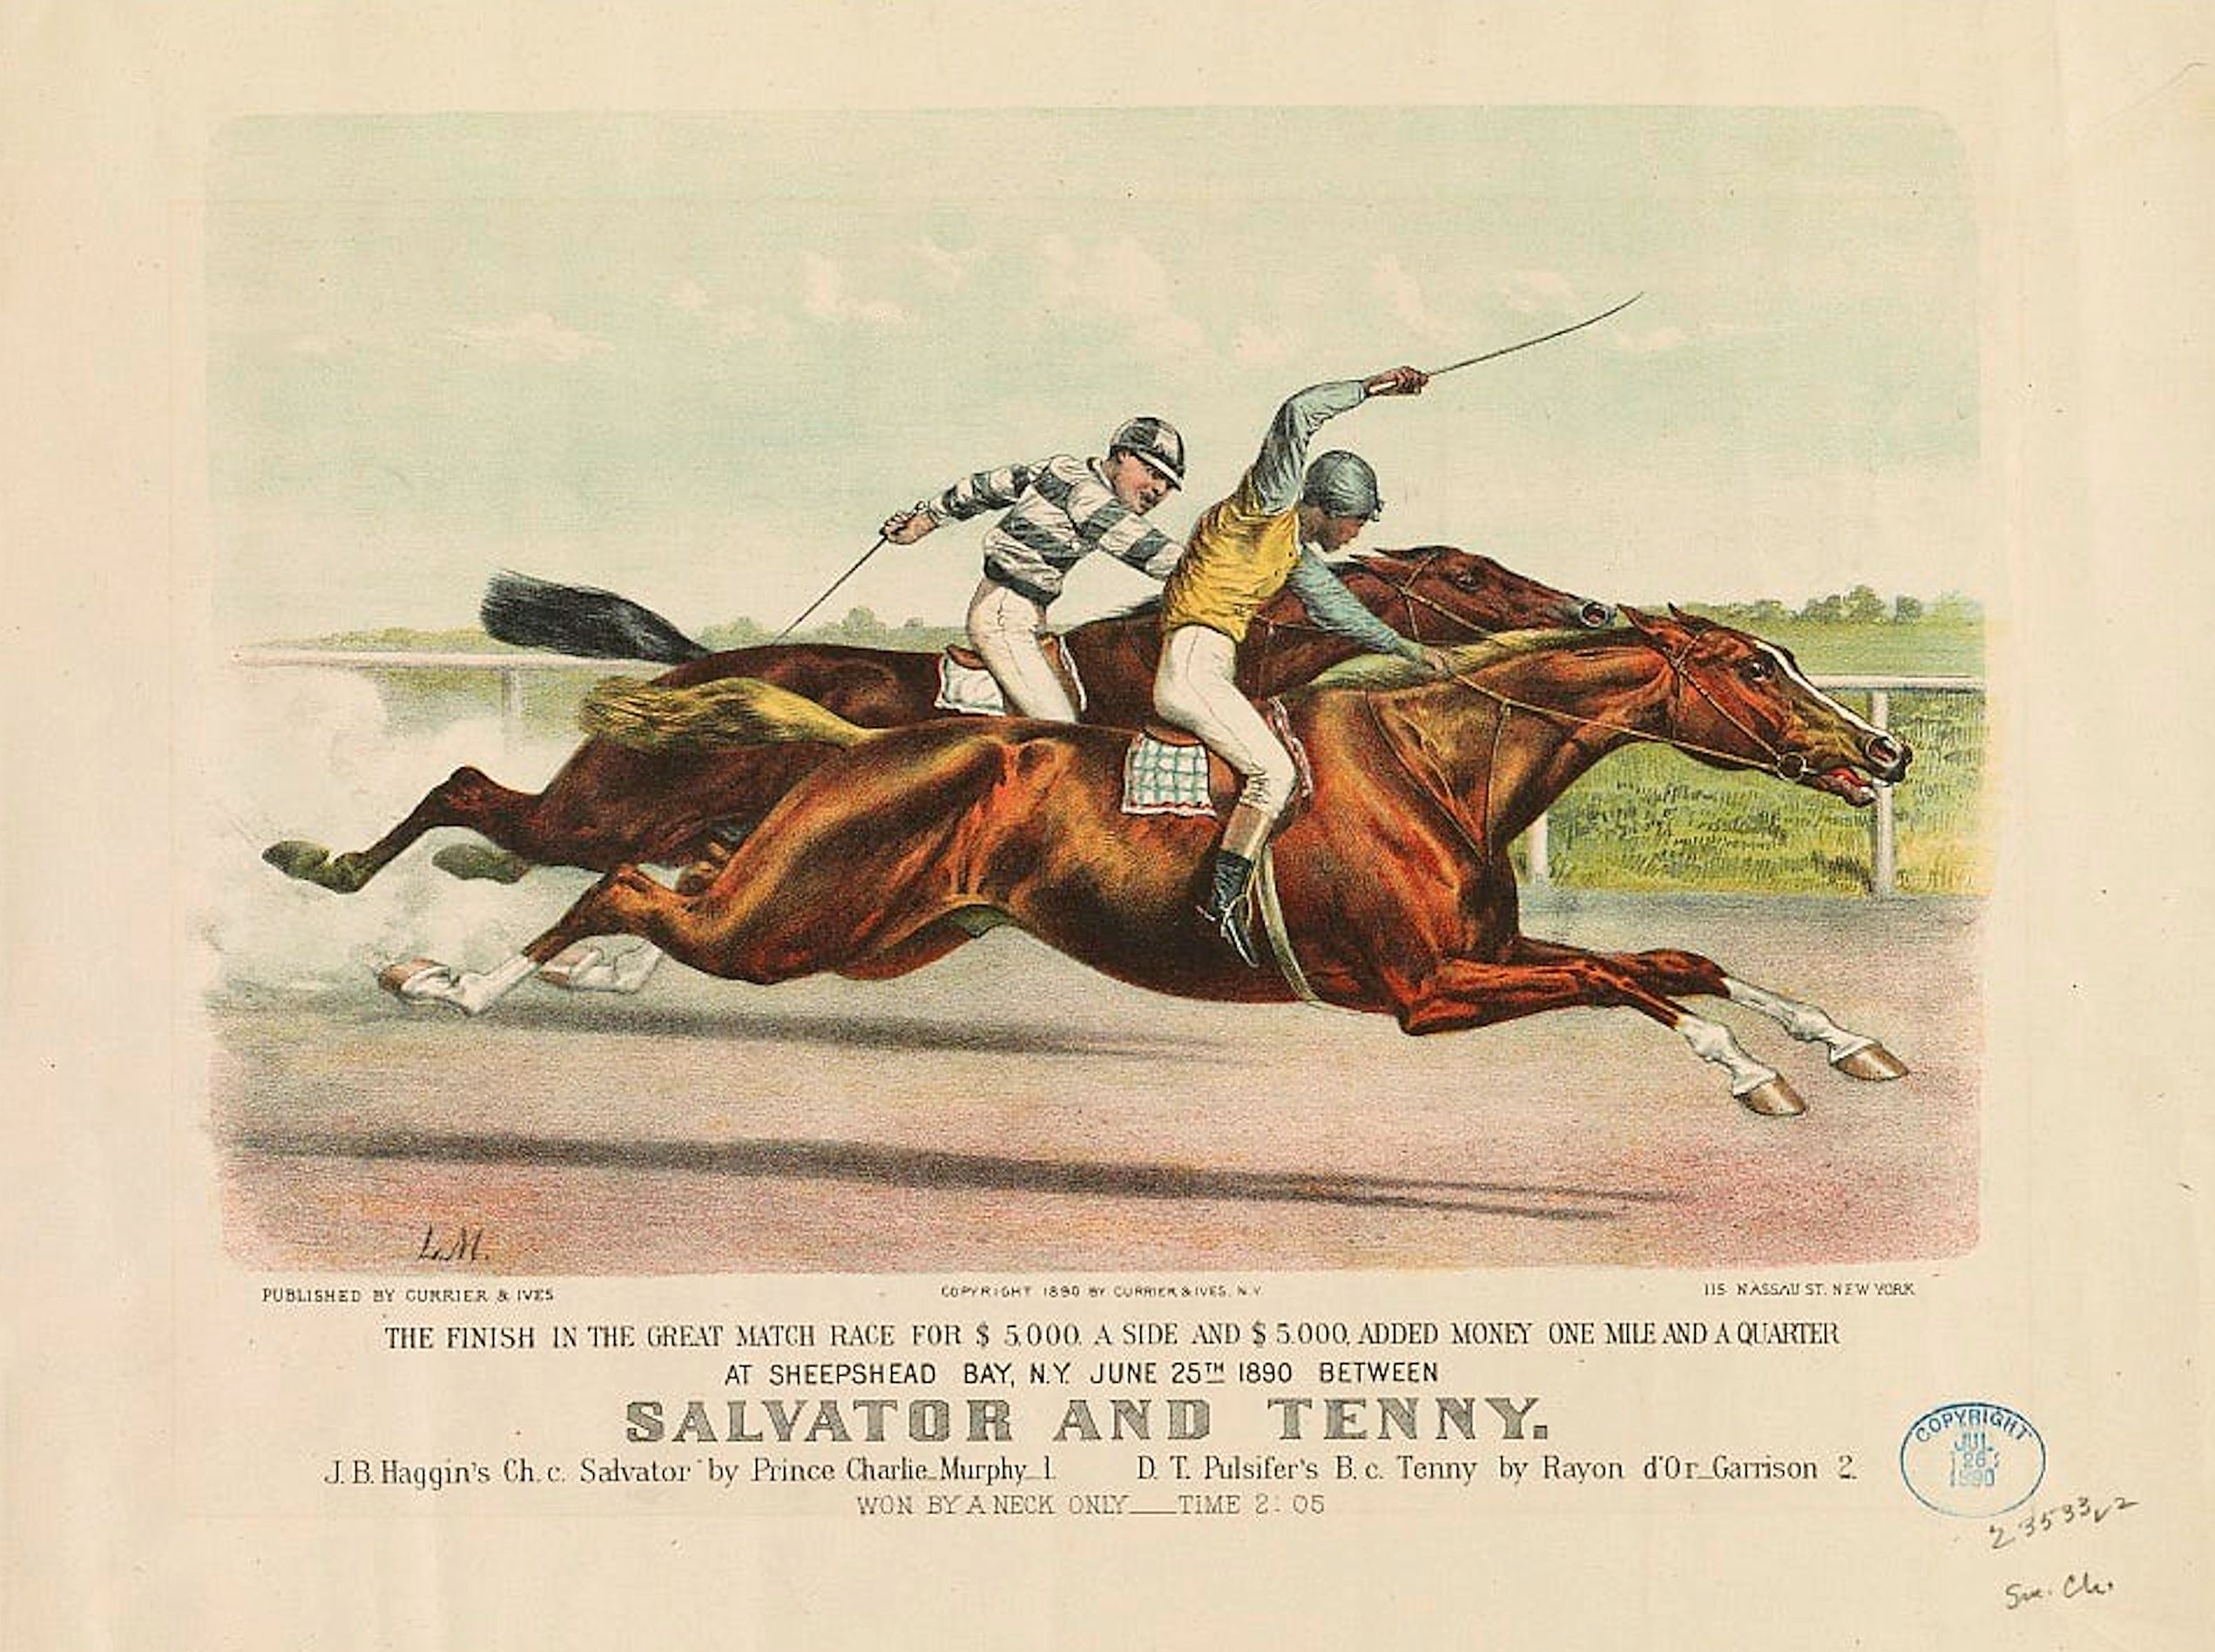 Salvator defeating Tenny in a match race (Currier and Ives)